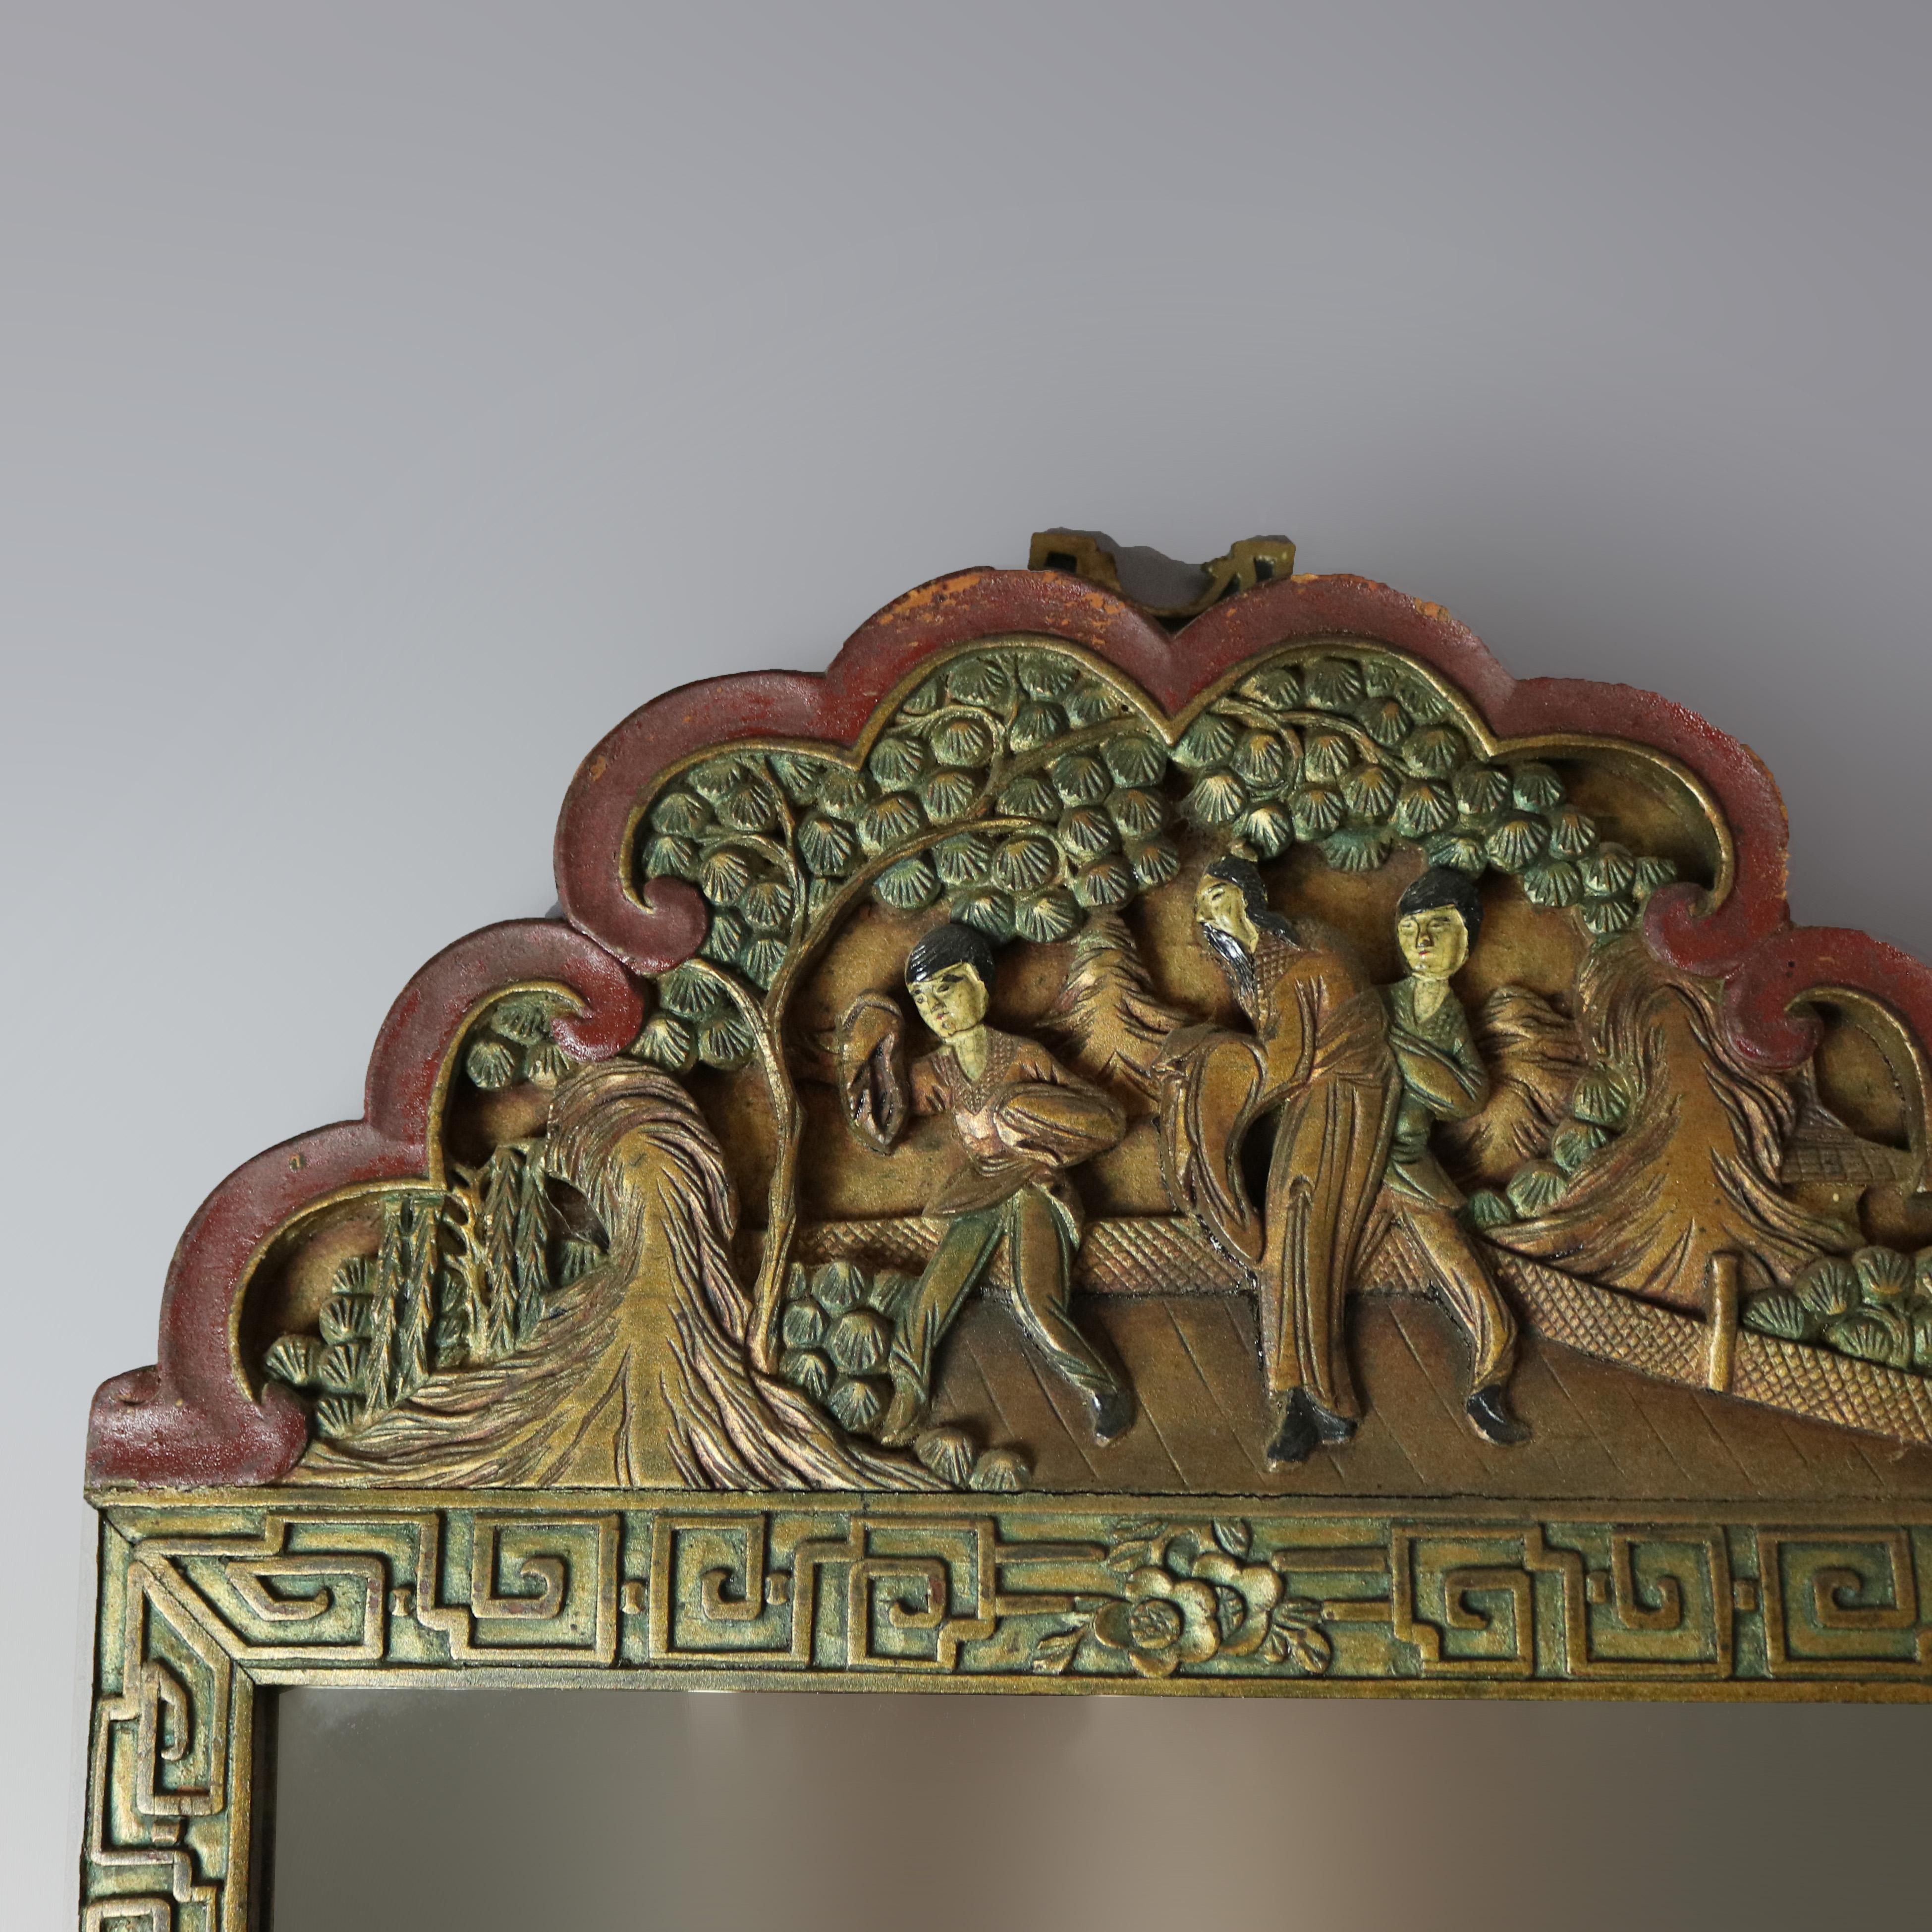 An antique Asian Chinoiserie decorated wall mirror offers carved and polychromed hardwood frame with genre scenes in relief and foliate elements throughout, beveled mirror, 20th century

Measures: 28.5